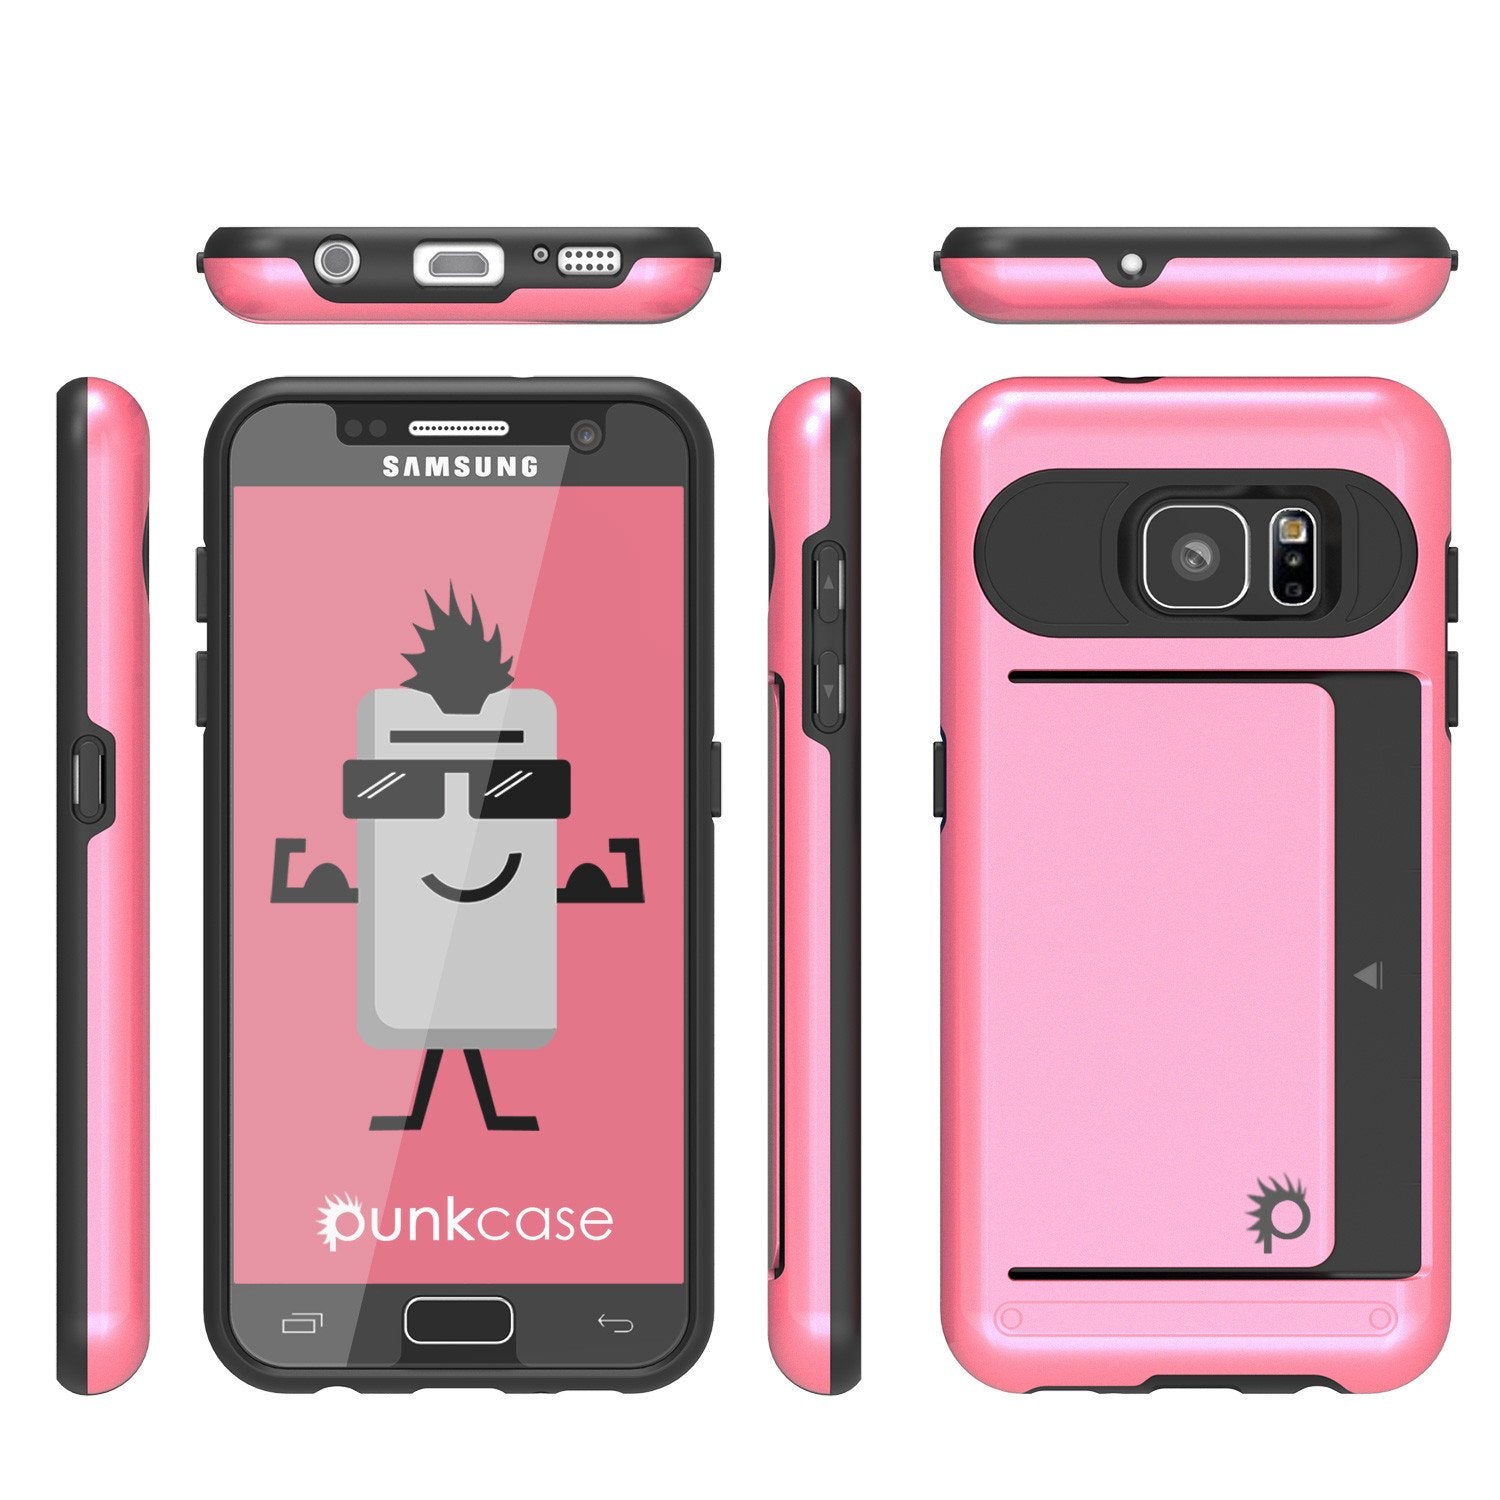 Galaxy s7 Case PunkCase CLUTCH Pink Series Slim Armor Soft Cover Case w/ Tempered Glass - PunkCase NZ